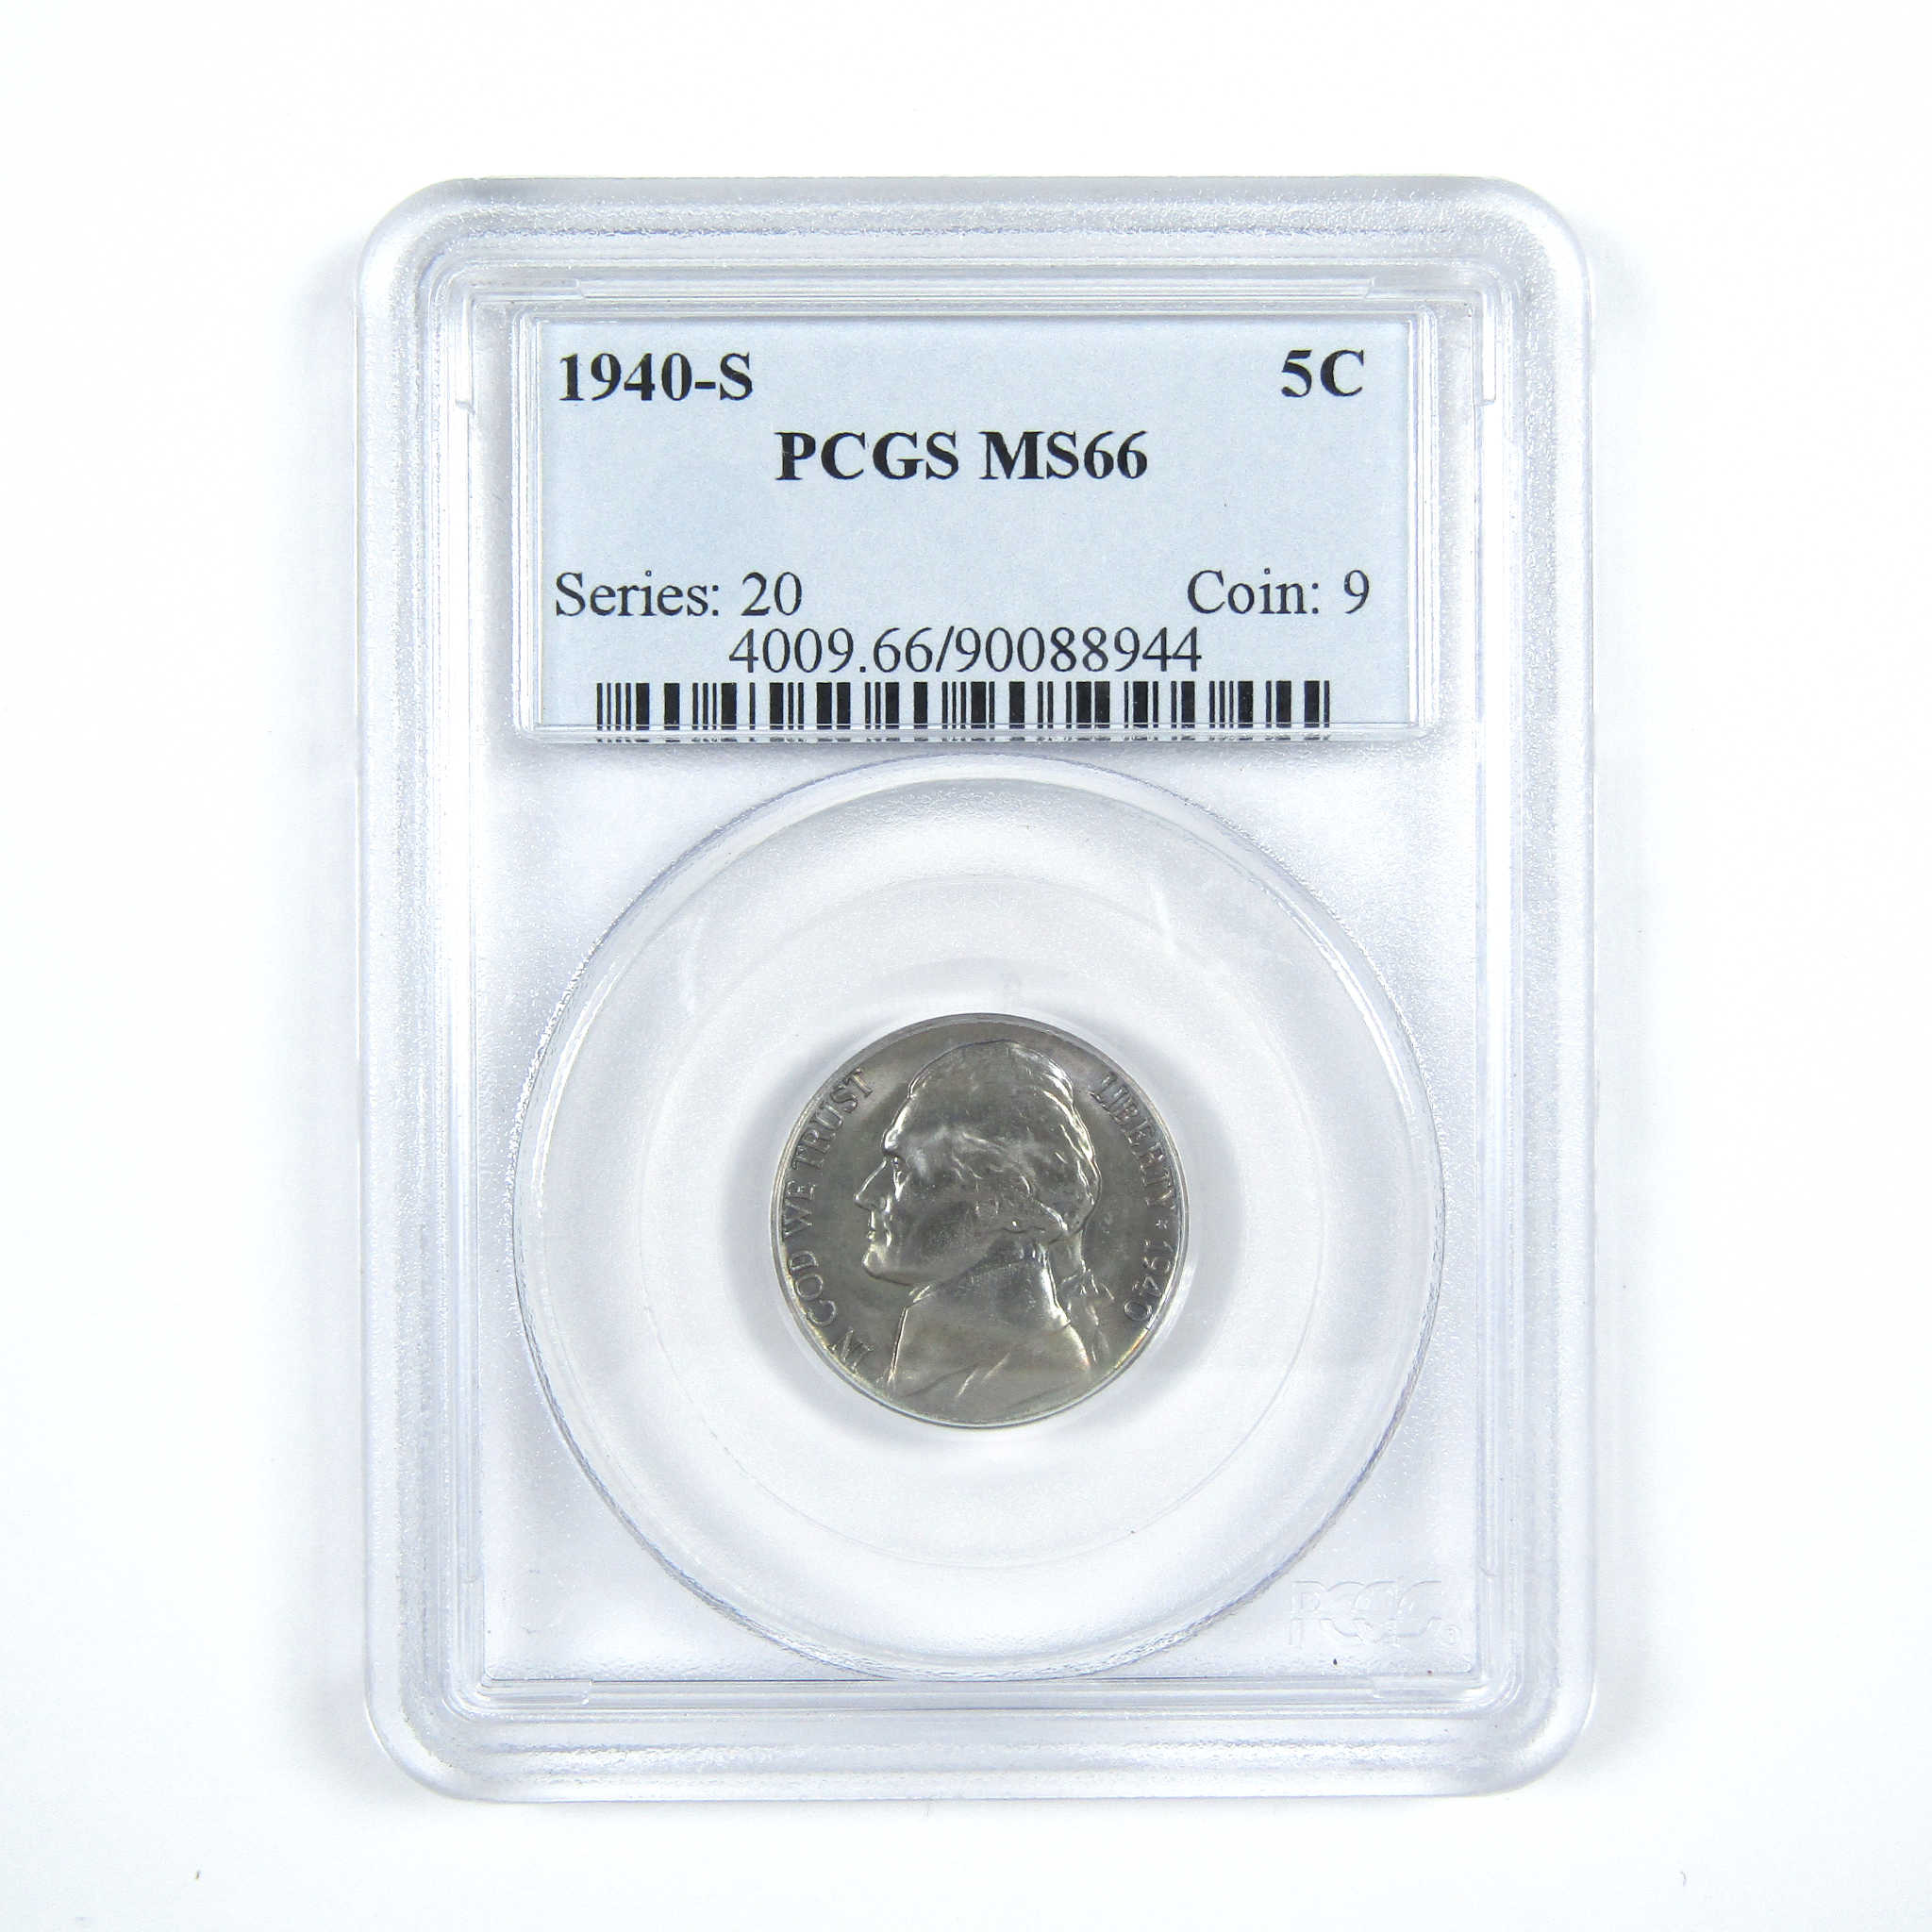 1940 S Jefferson Nickel MS 66 PCGS 5c Uncirculated Coin SKU:CPC7438